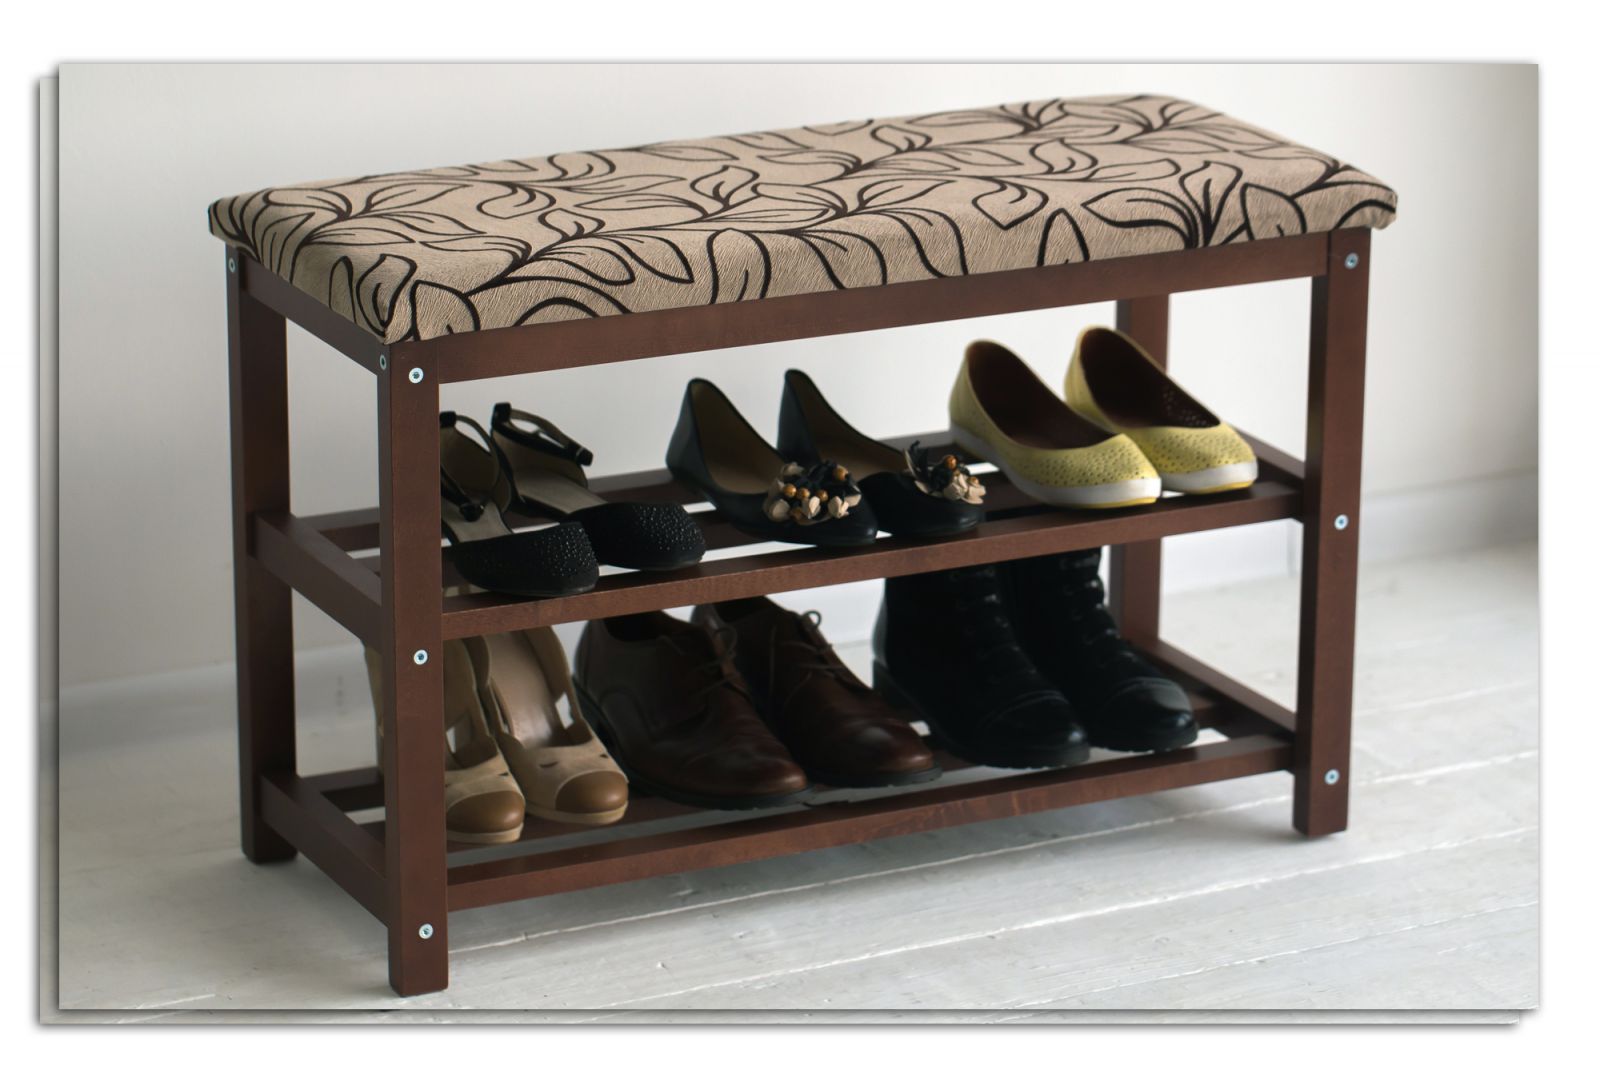 Find Compact Shoe Stands for your Israeli Home